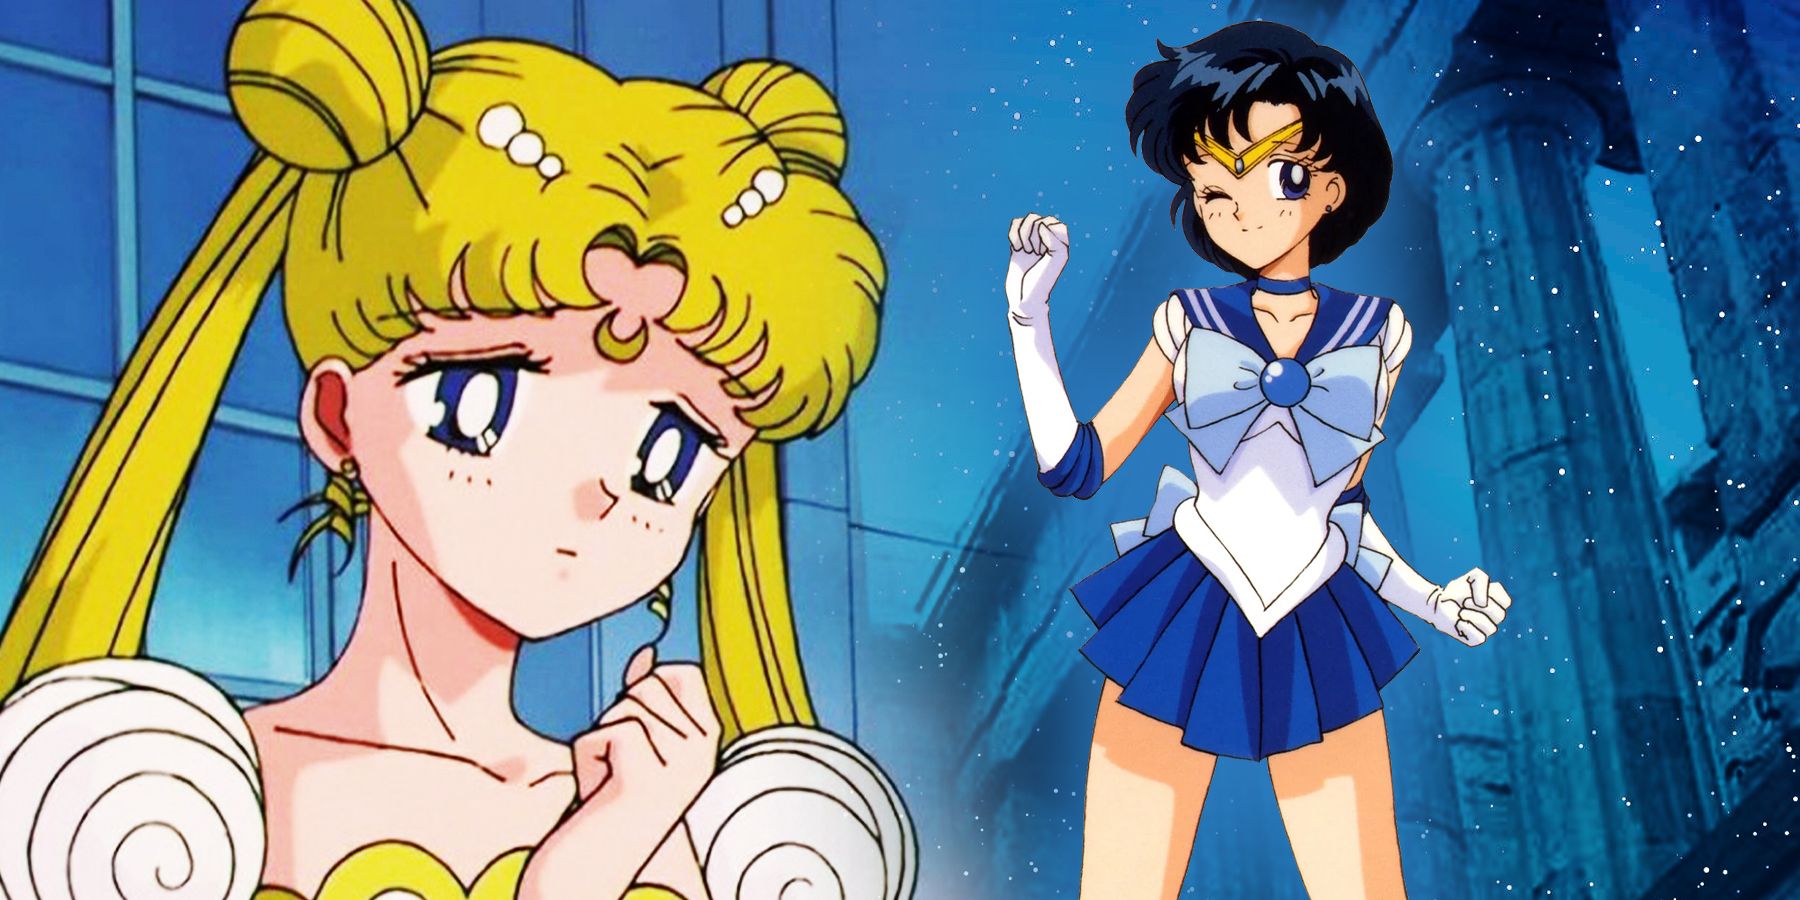 Princess Serenity and Sailor Mercury as seen in anime Sailor Moon in front of Greek pillars.